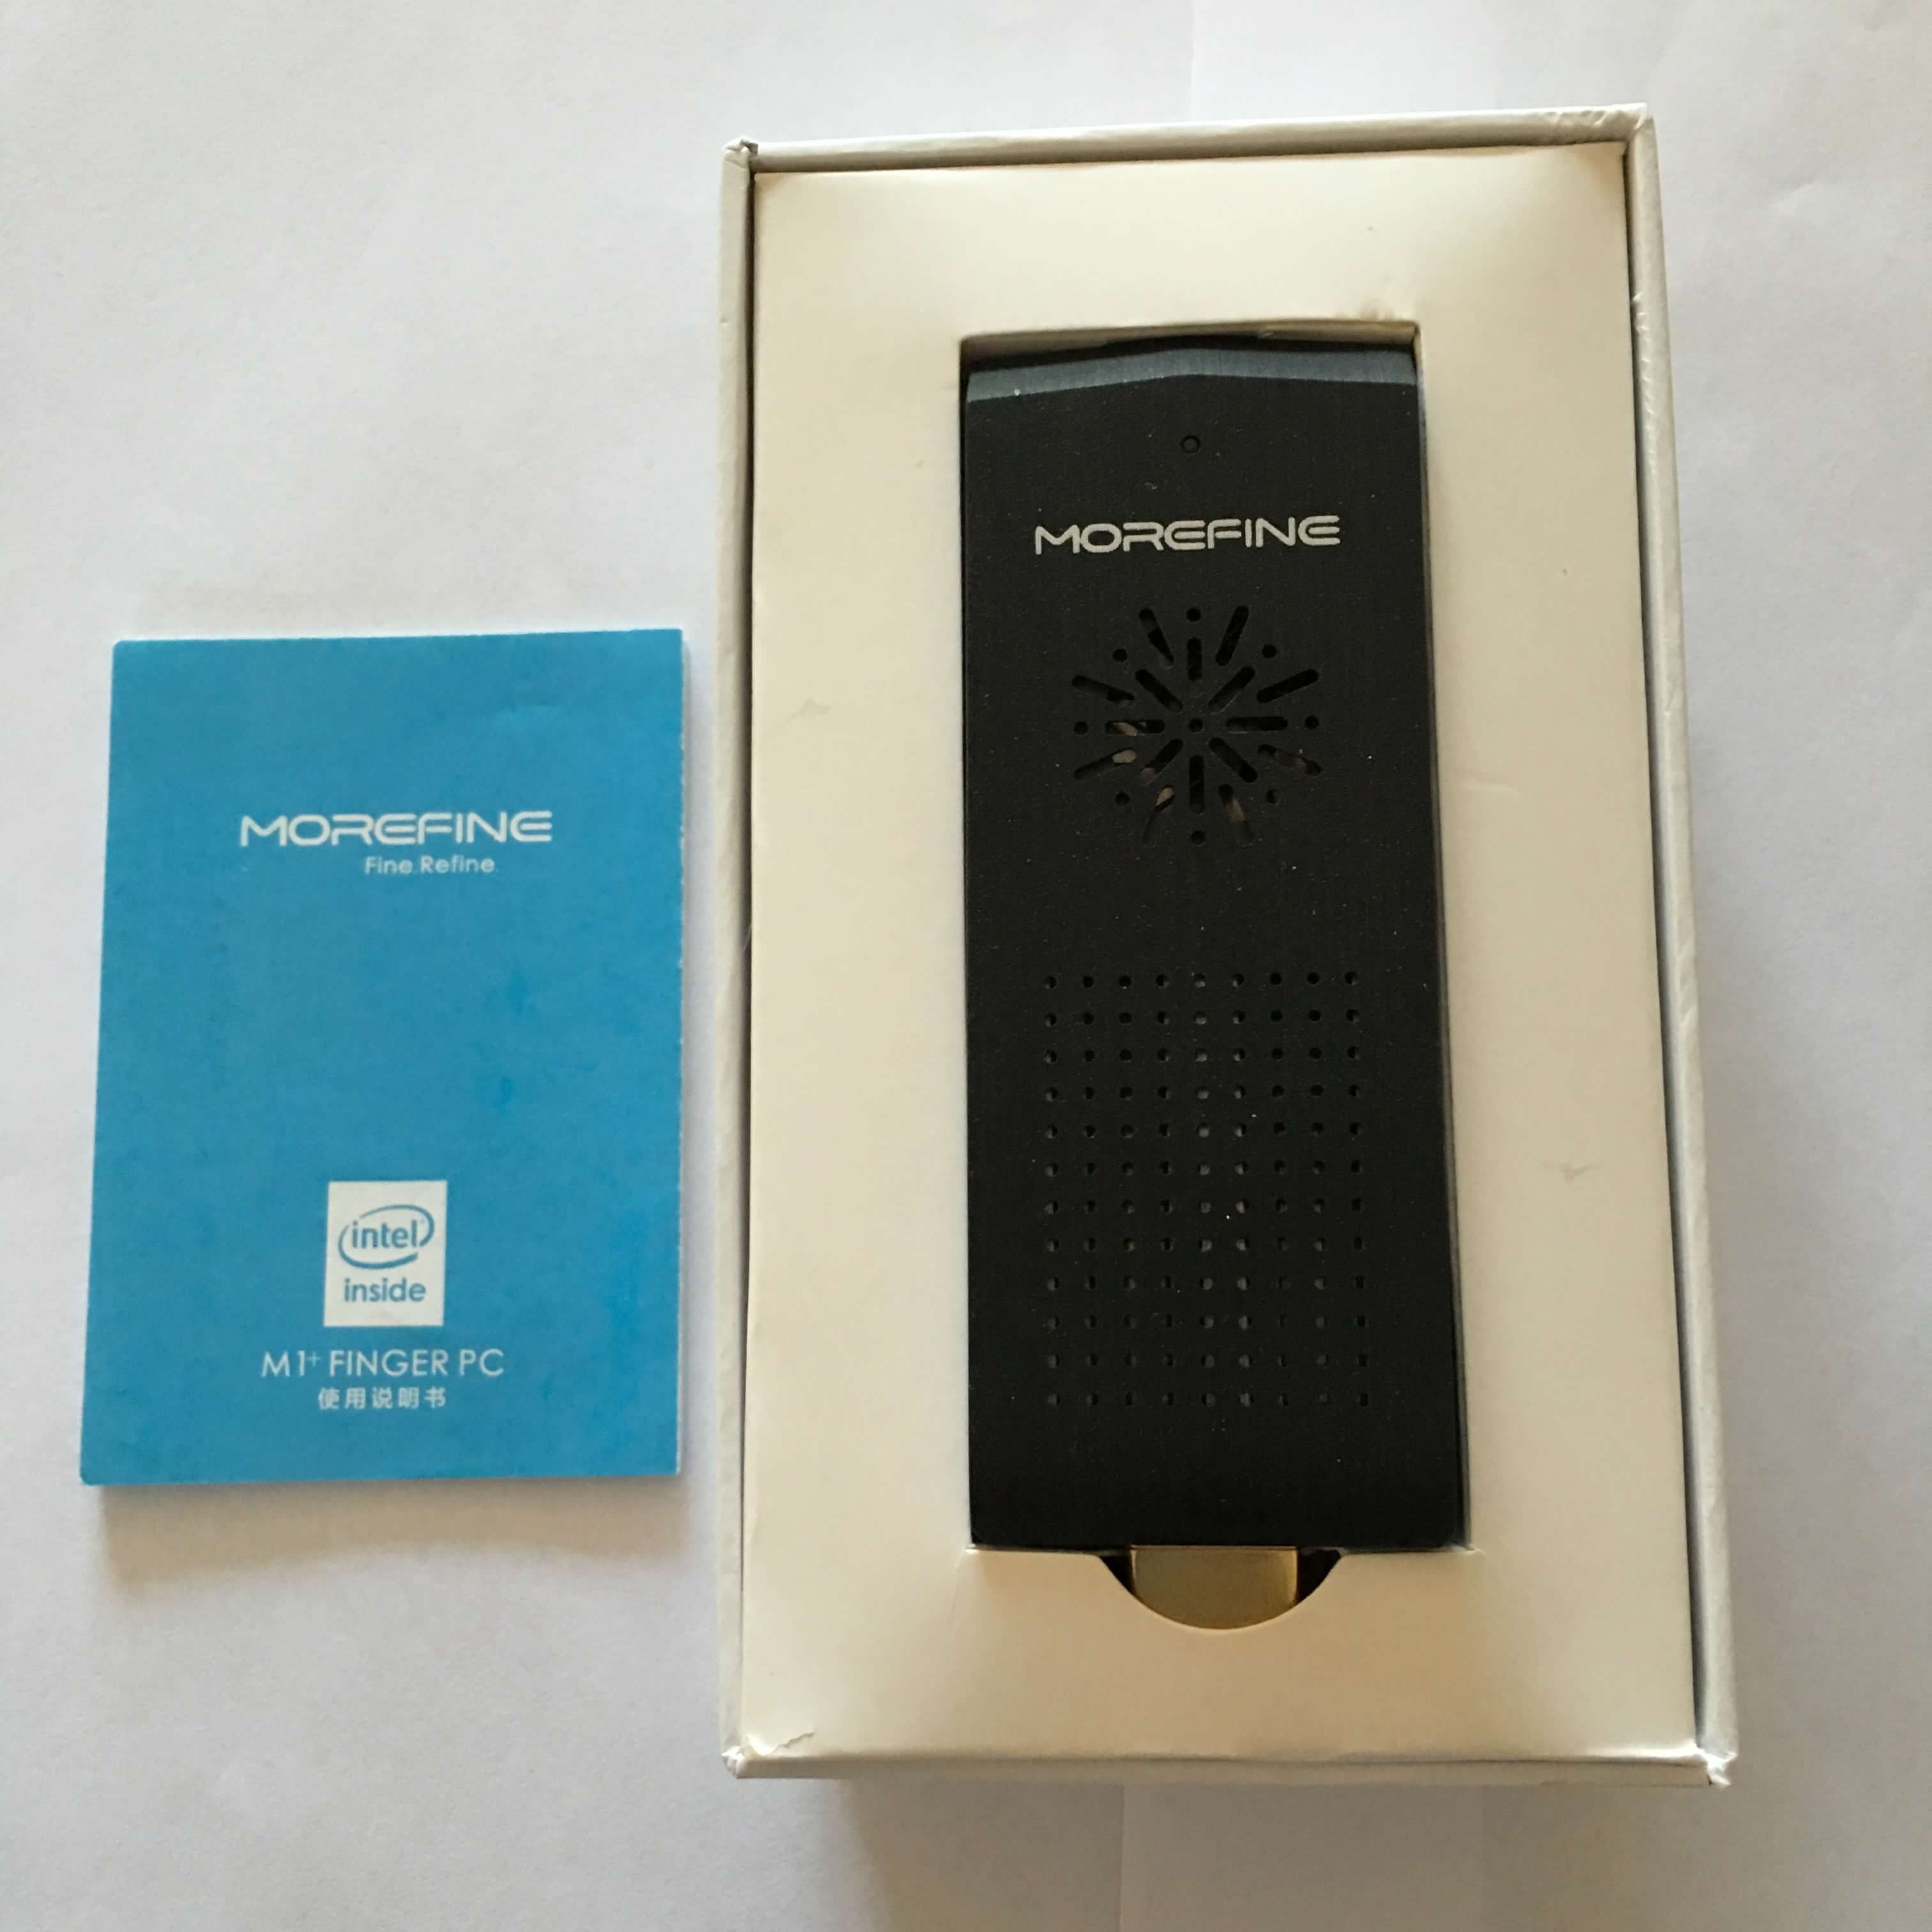 EBox TV Stick Review - Dual Boot Windows 10 and Android